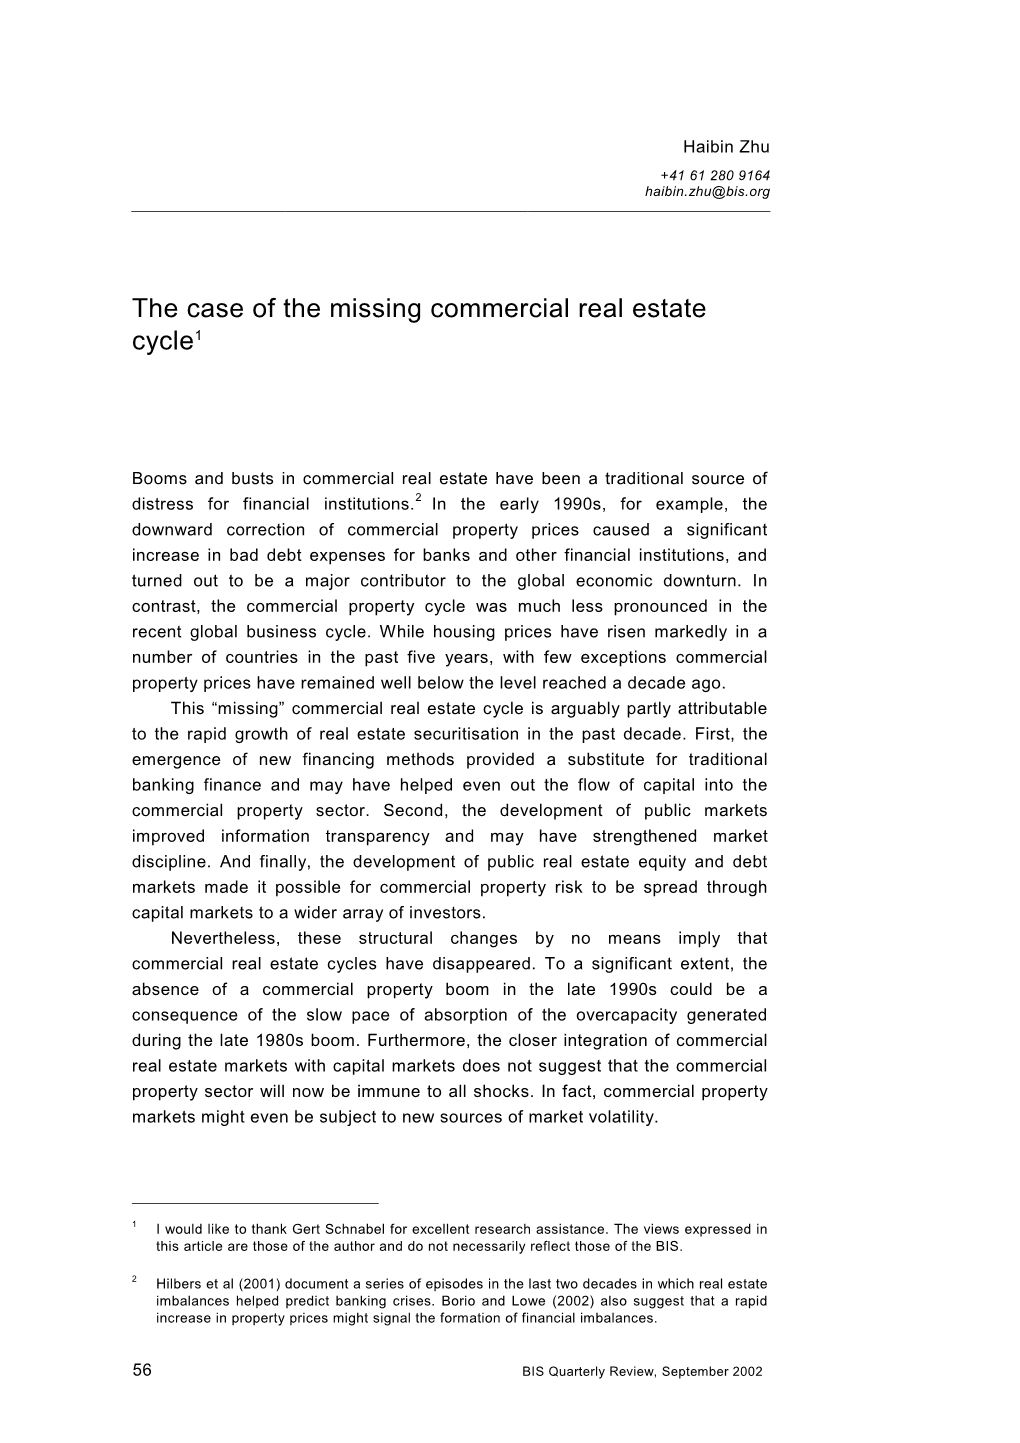 The Case of the Missing Commercial Real Estate Cycle1